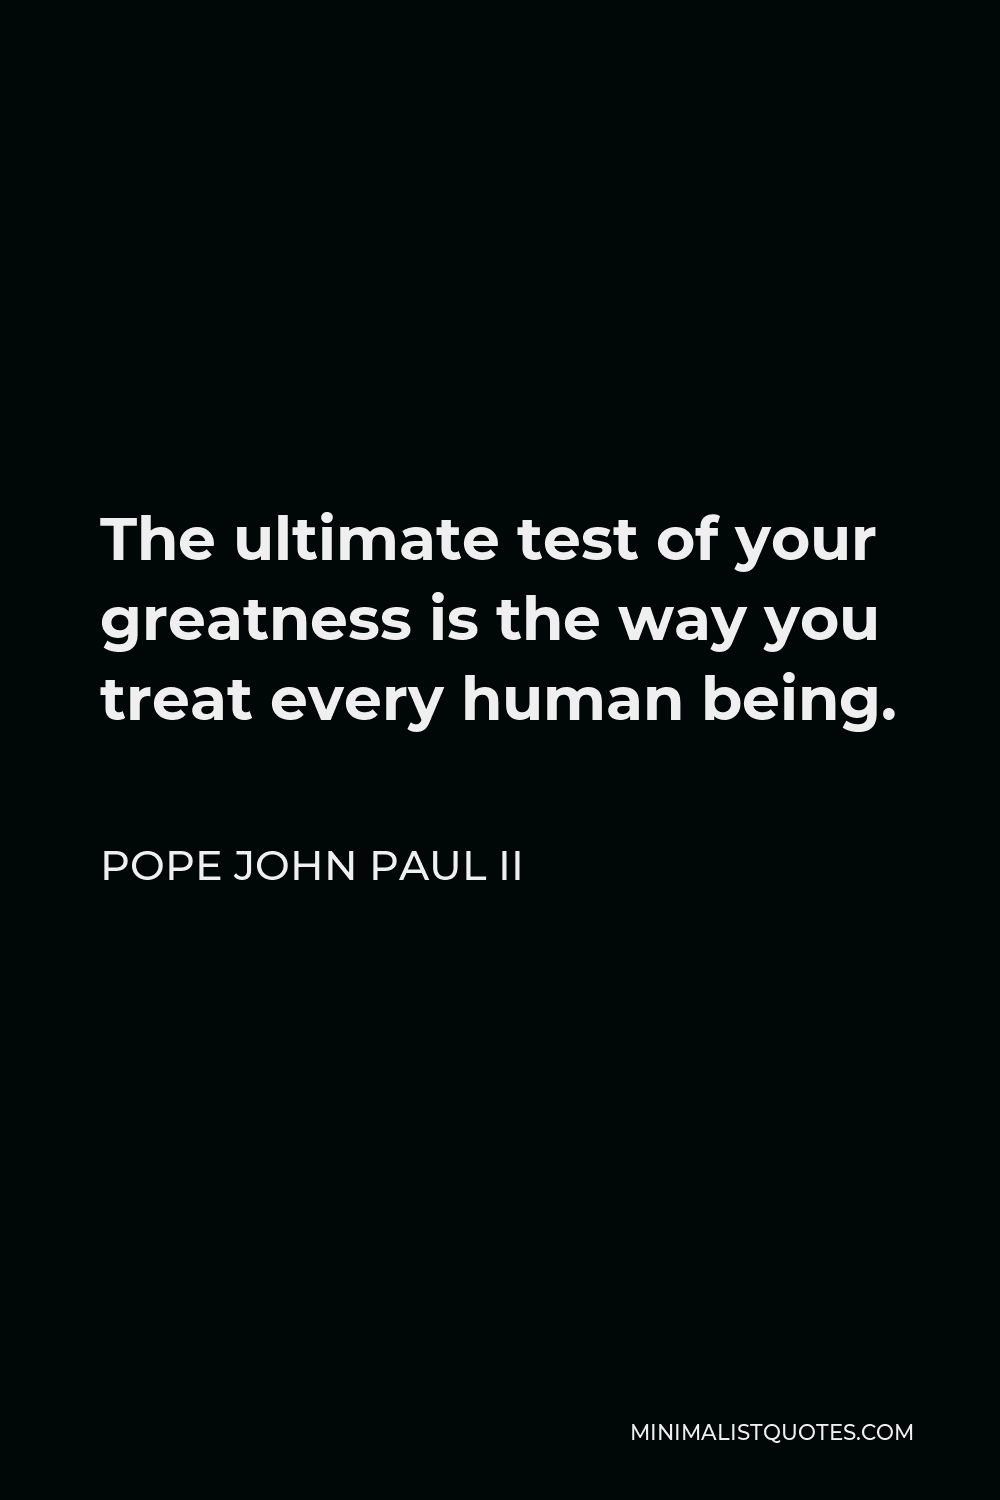 Pope John Paul II Quote - The ultimate test of your greatness is the way you treat every human being.